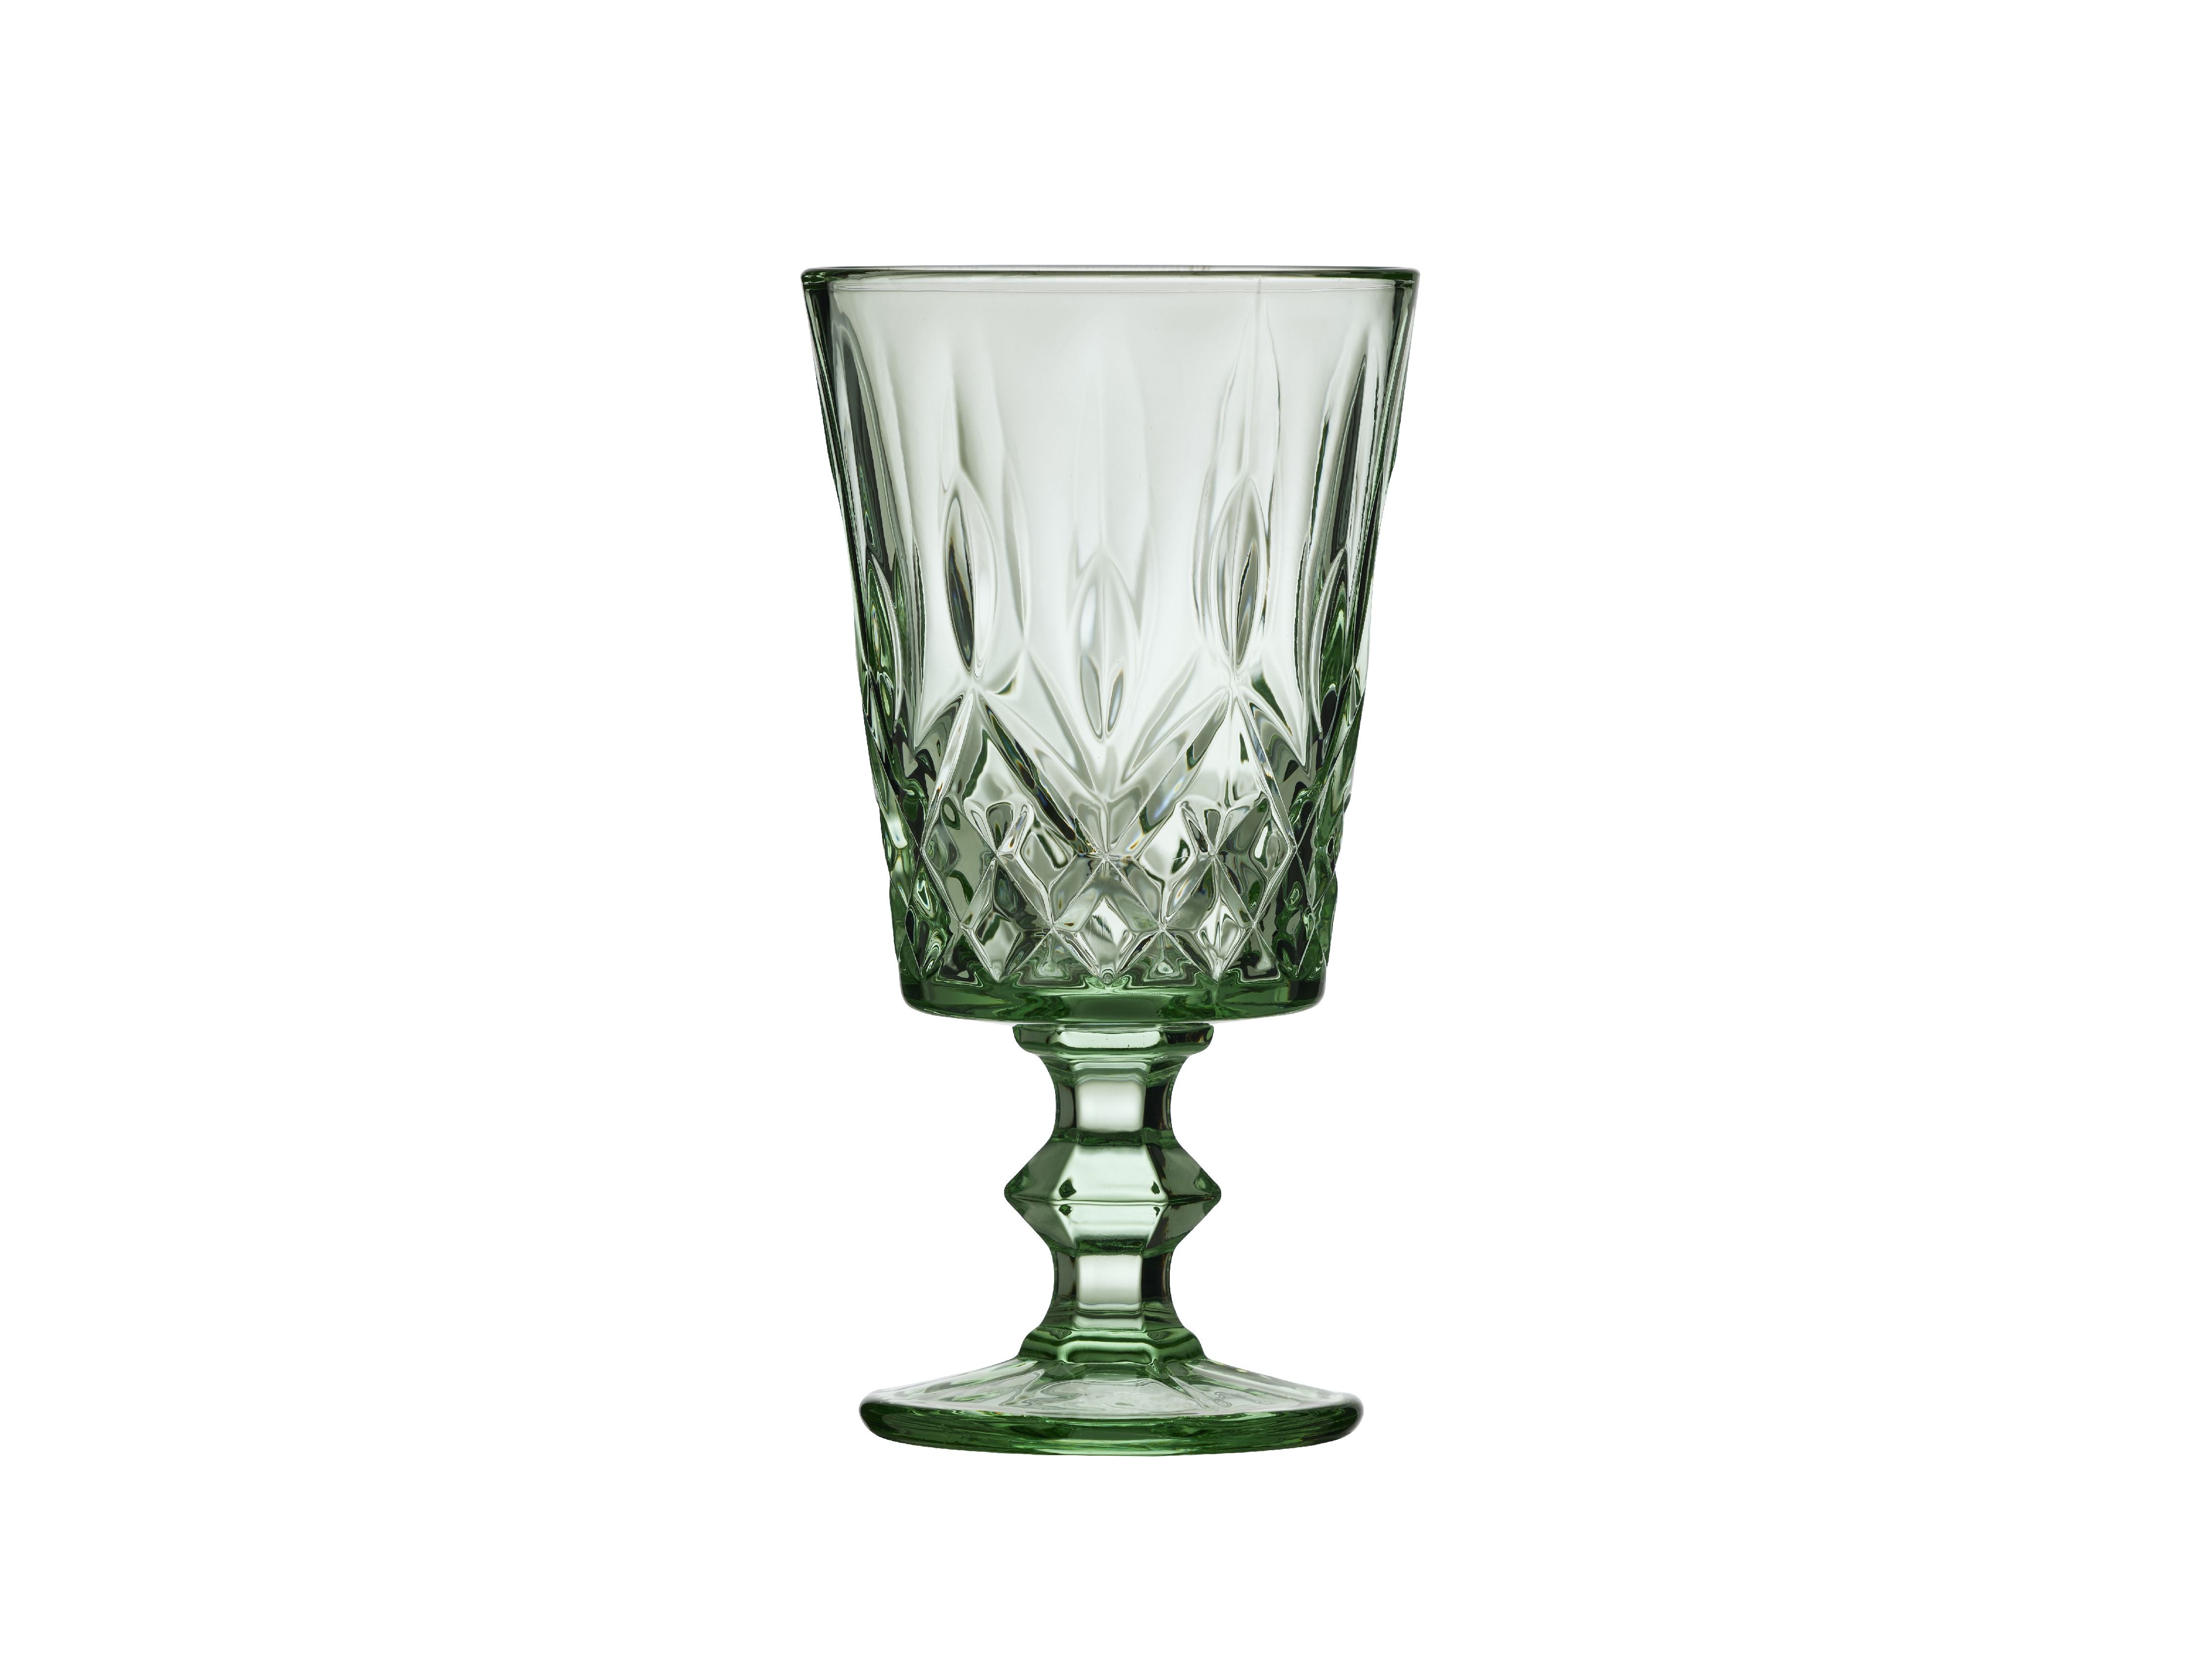 Lyngby Glas Sorrento酒杯29 Cl 4 PC。，绿色